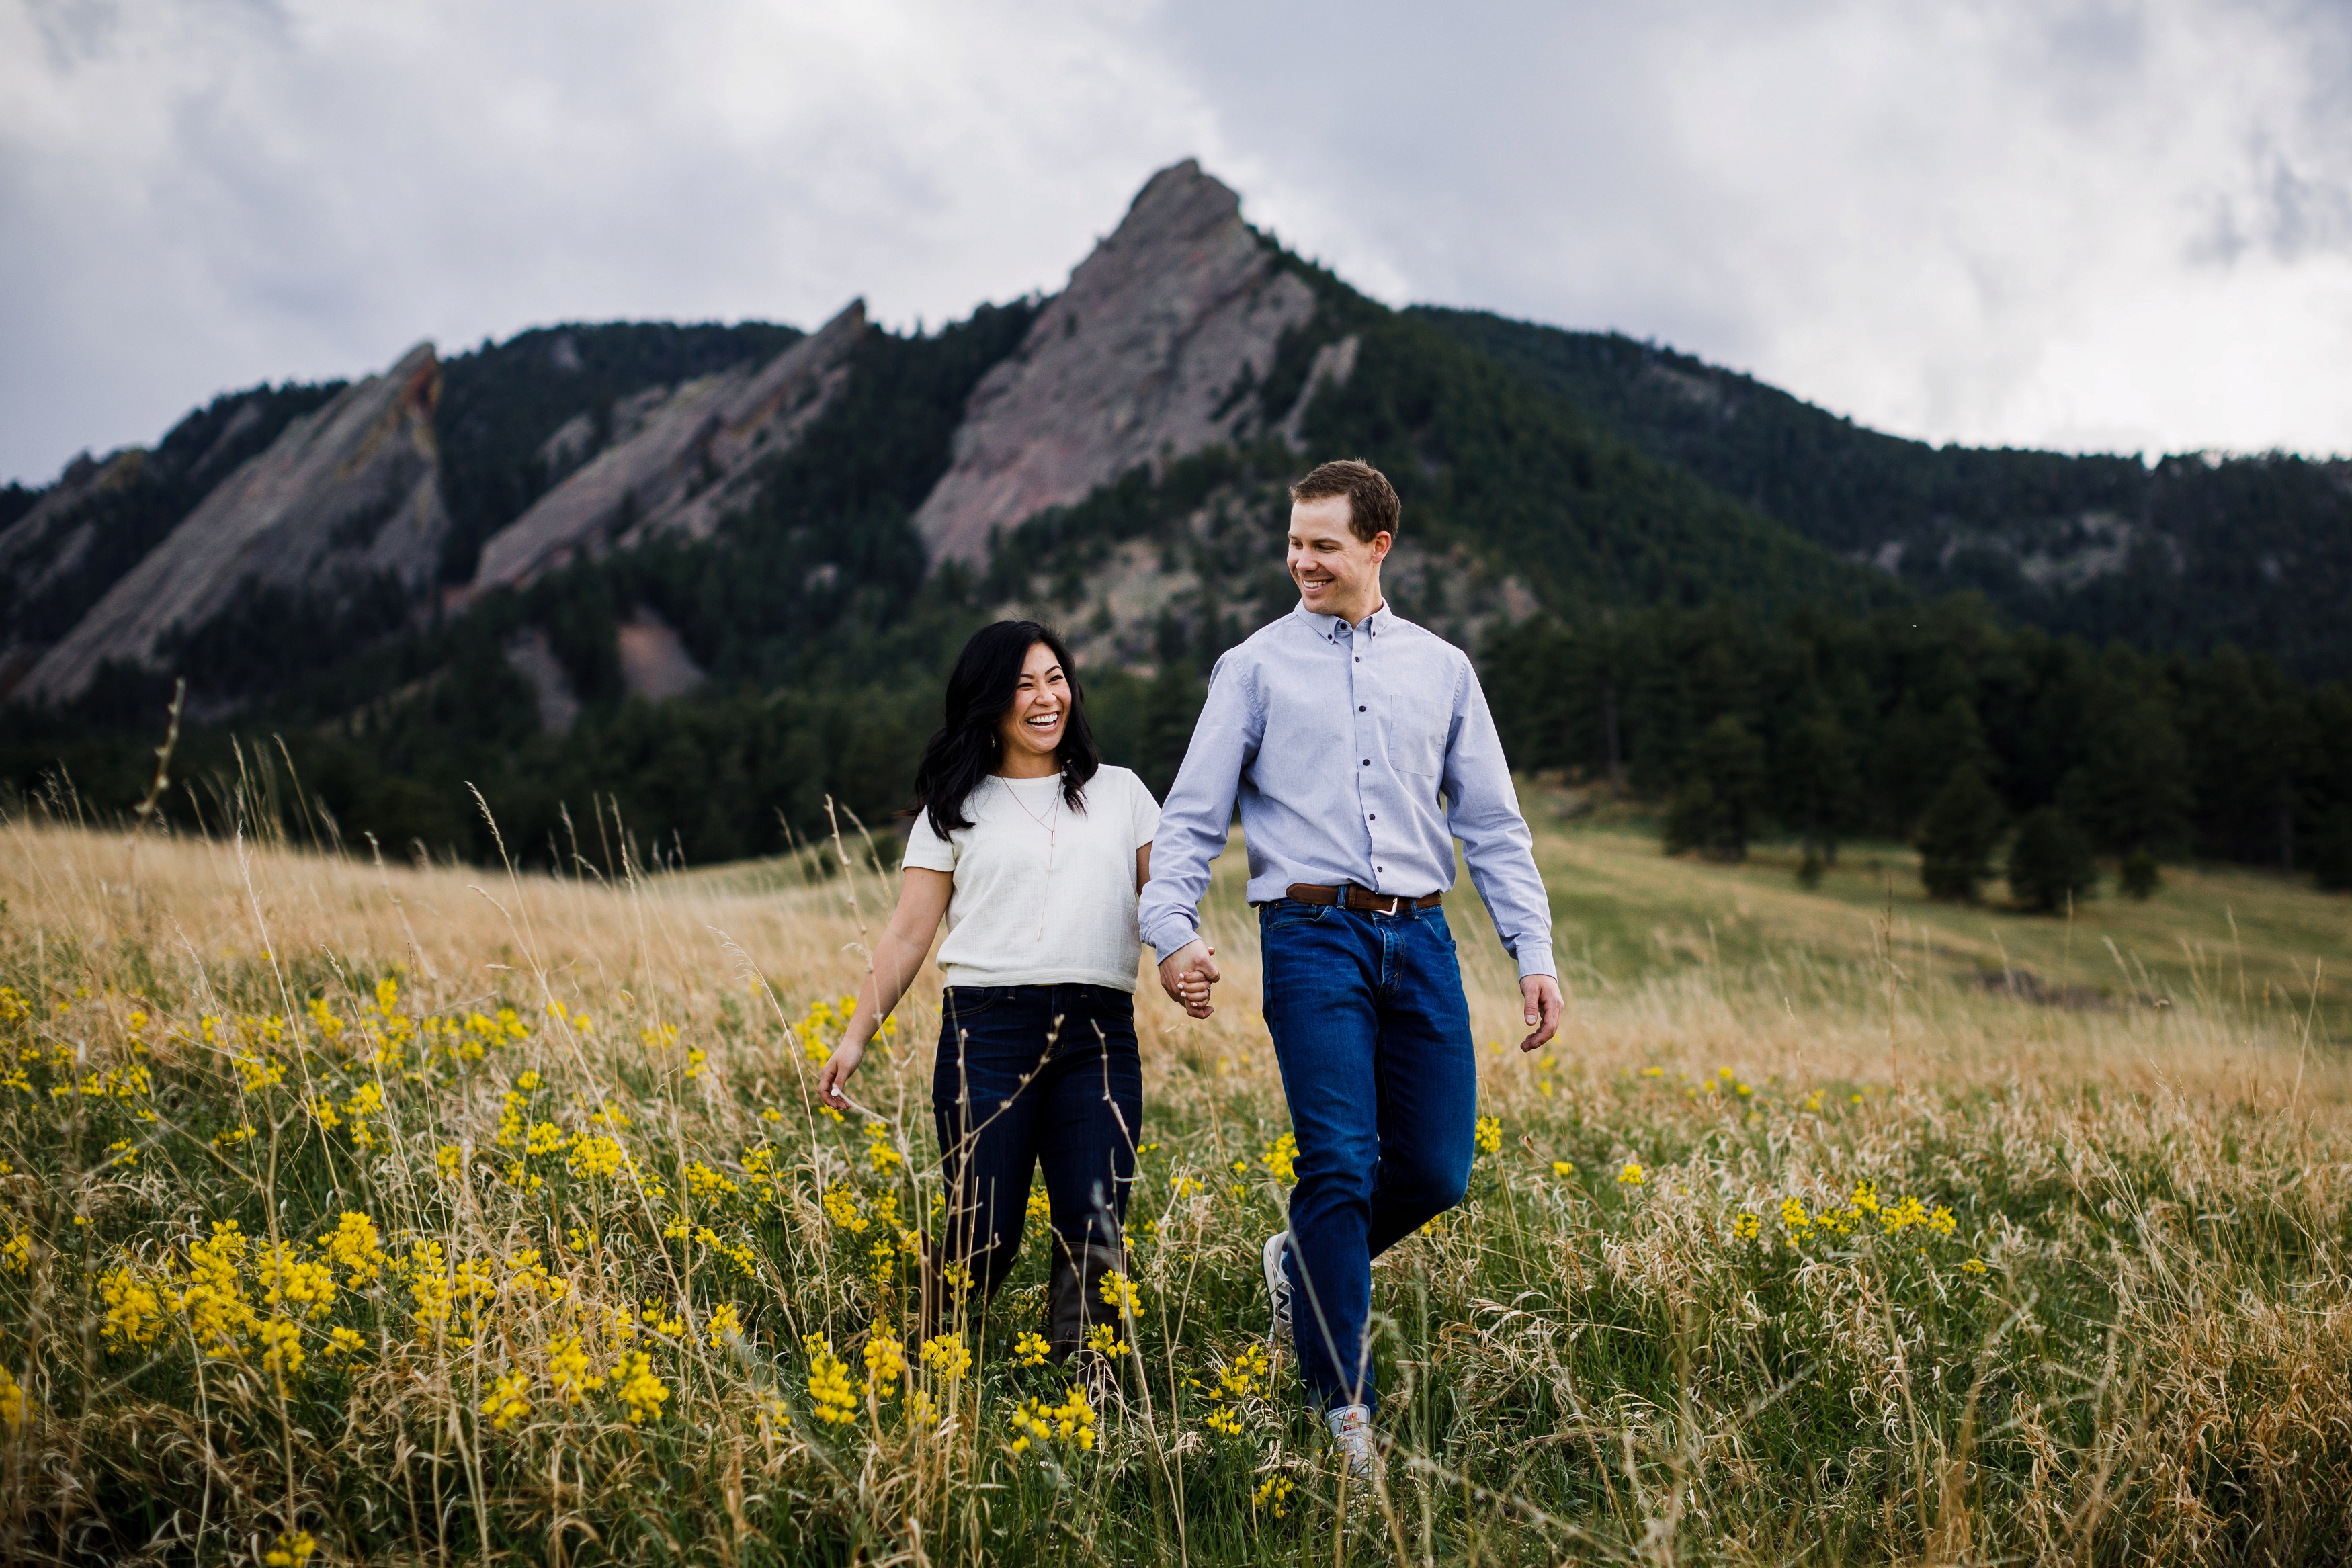 Chautauqua Park Engagement photo in front of the Flat Irons